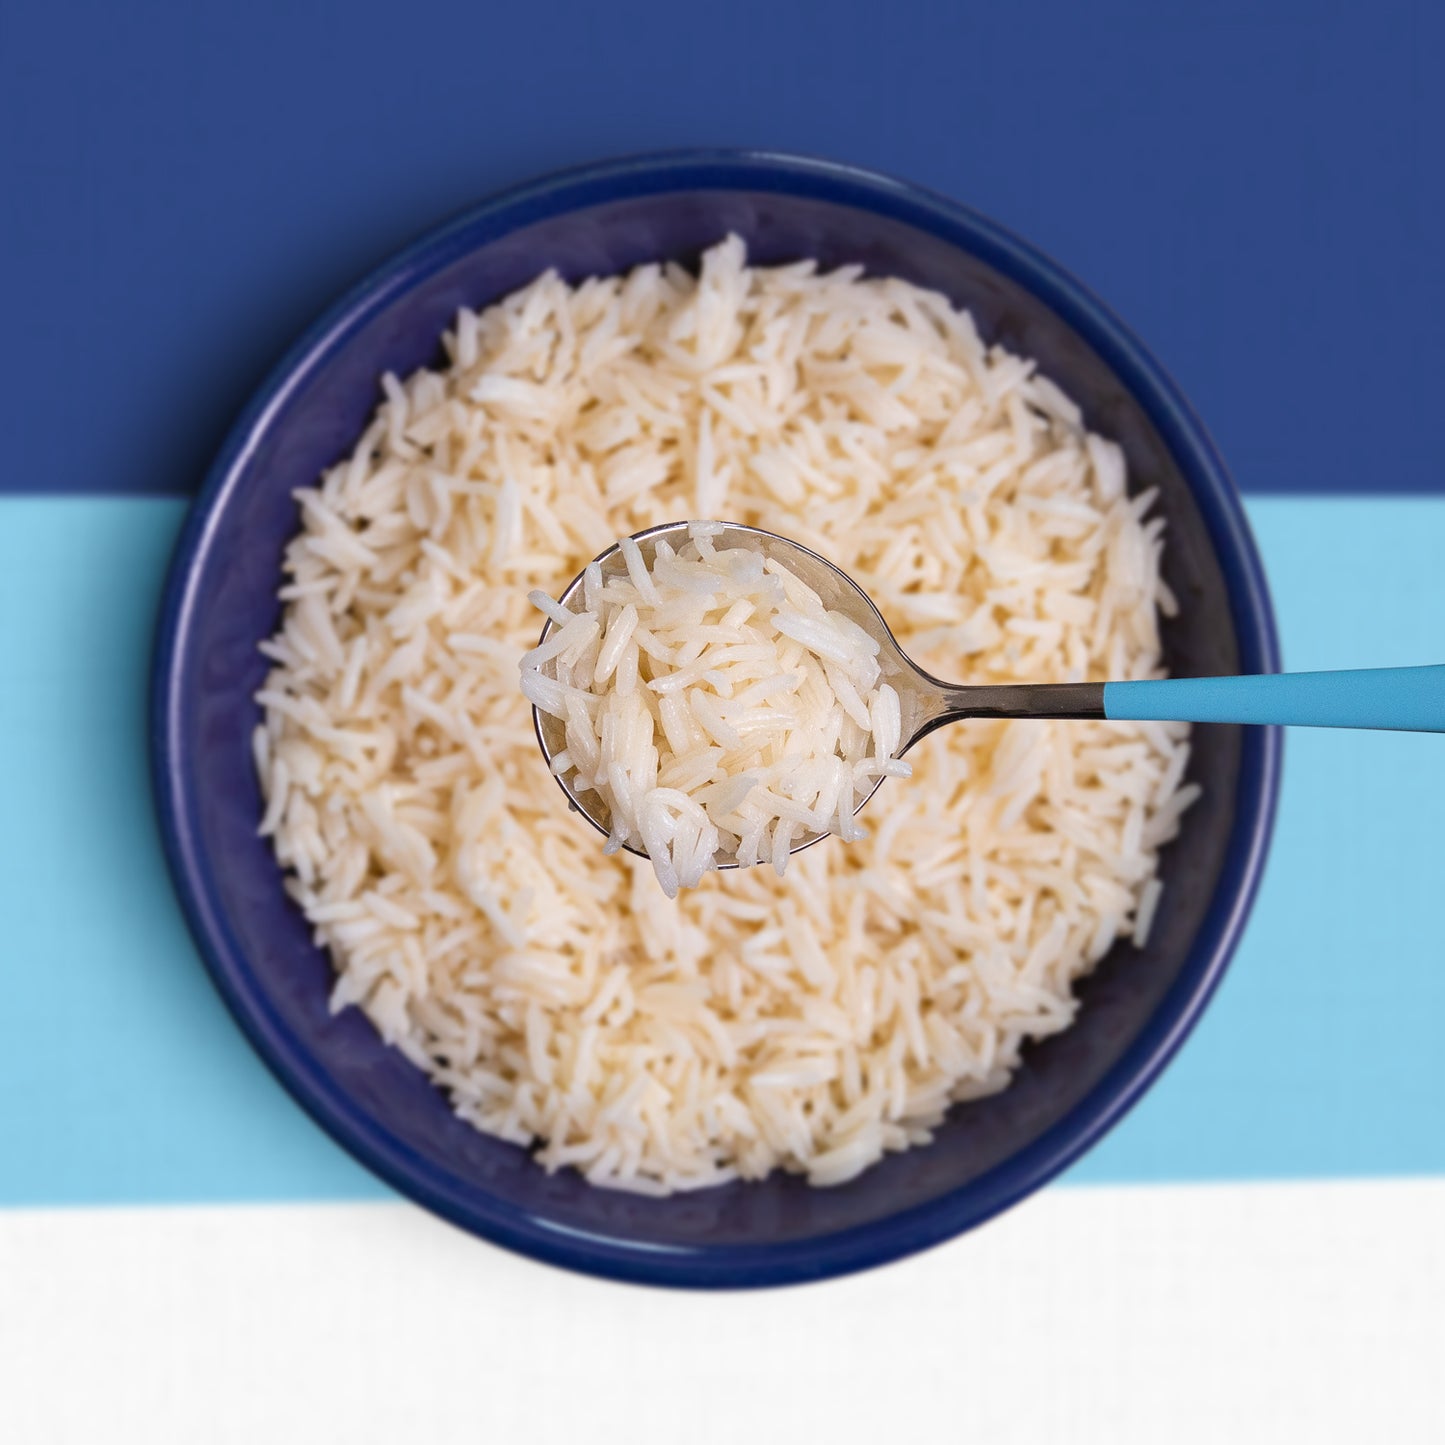 Basmati Rice Zoomed in with Happy Spoon - Eat Proper Good